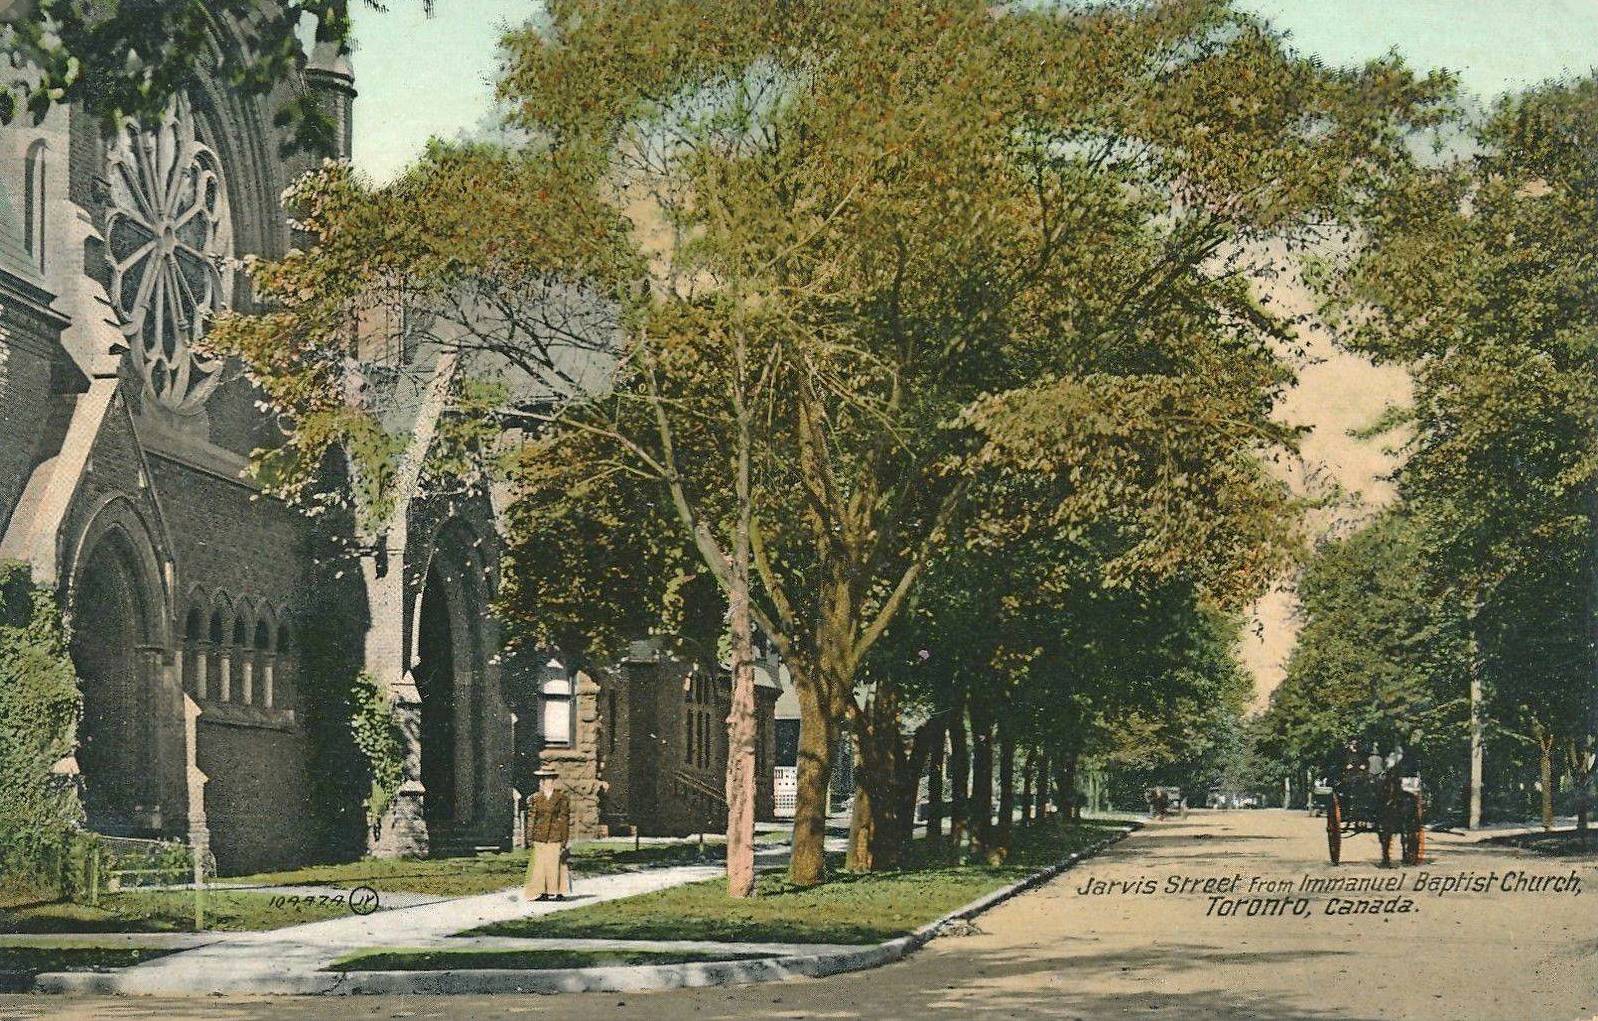 AA POSTCARD - TORONTO - JARVIS STREET - FROM IMMANUEL BAPTIST CHURCH - GROUND LEVEL - WOMAN WALKING IN FRONT OF CHURCH - WAGON - TREE-LINED - NICE VERSION - TINTED - c1910